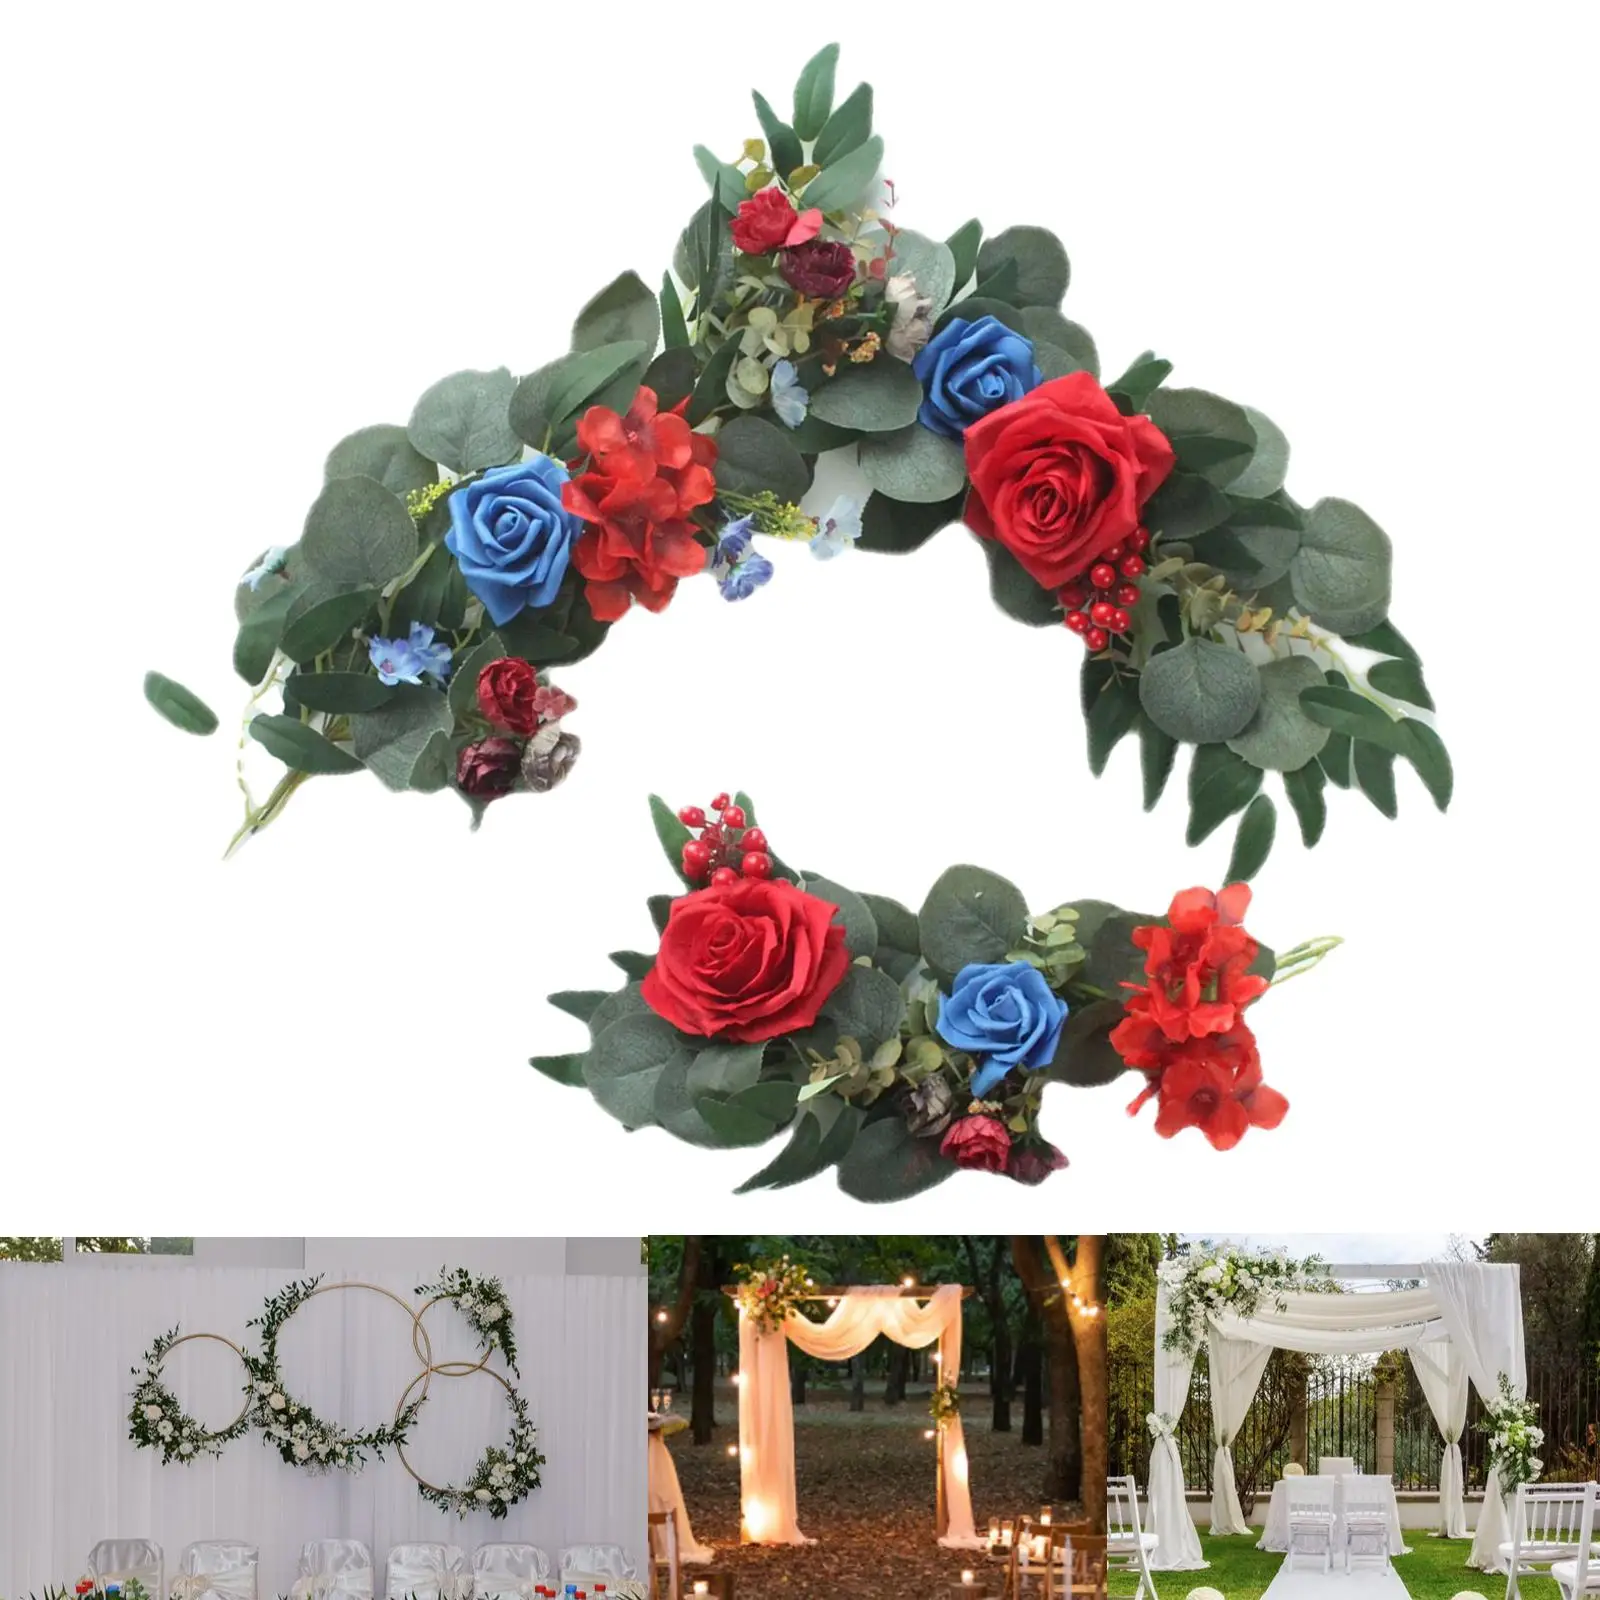 2Pcs Handmade Wedding Arch Flowers Kit Green Leaves Artificial Flowers for Ceremony Welcome Card Sign Corner Arch Decorations